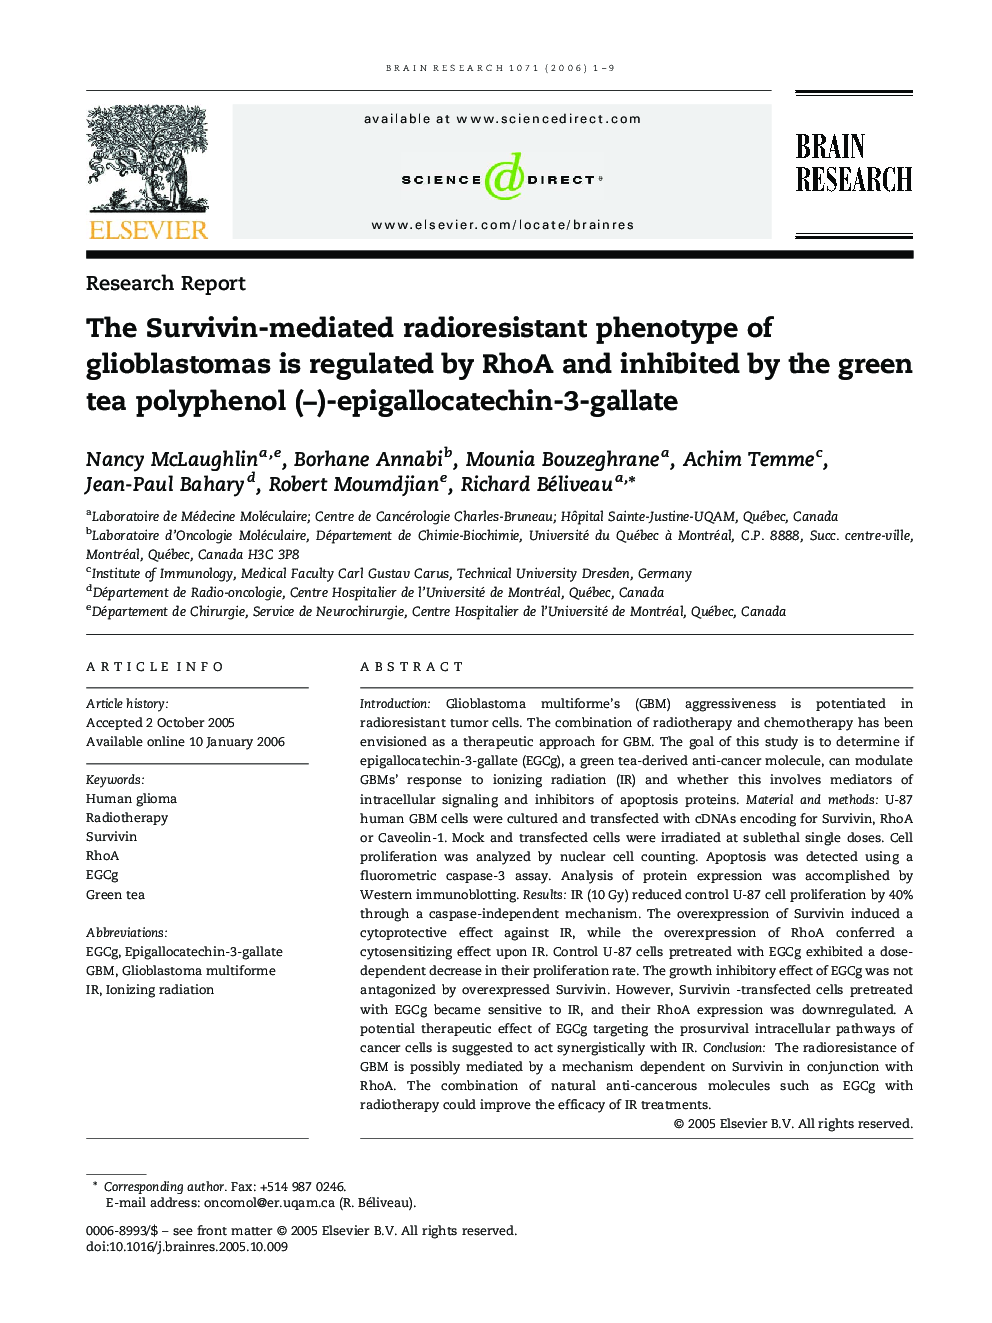 The Survivin-mediated radioresistant phenotype of glioblastomas is regulated by RhoA and inhibited by the green tea polyphenol (−)-epigallocatechin-3-gallate